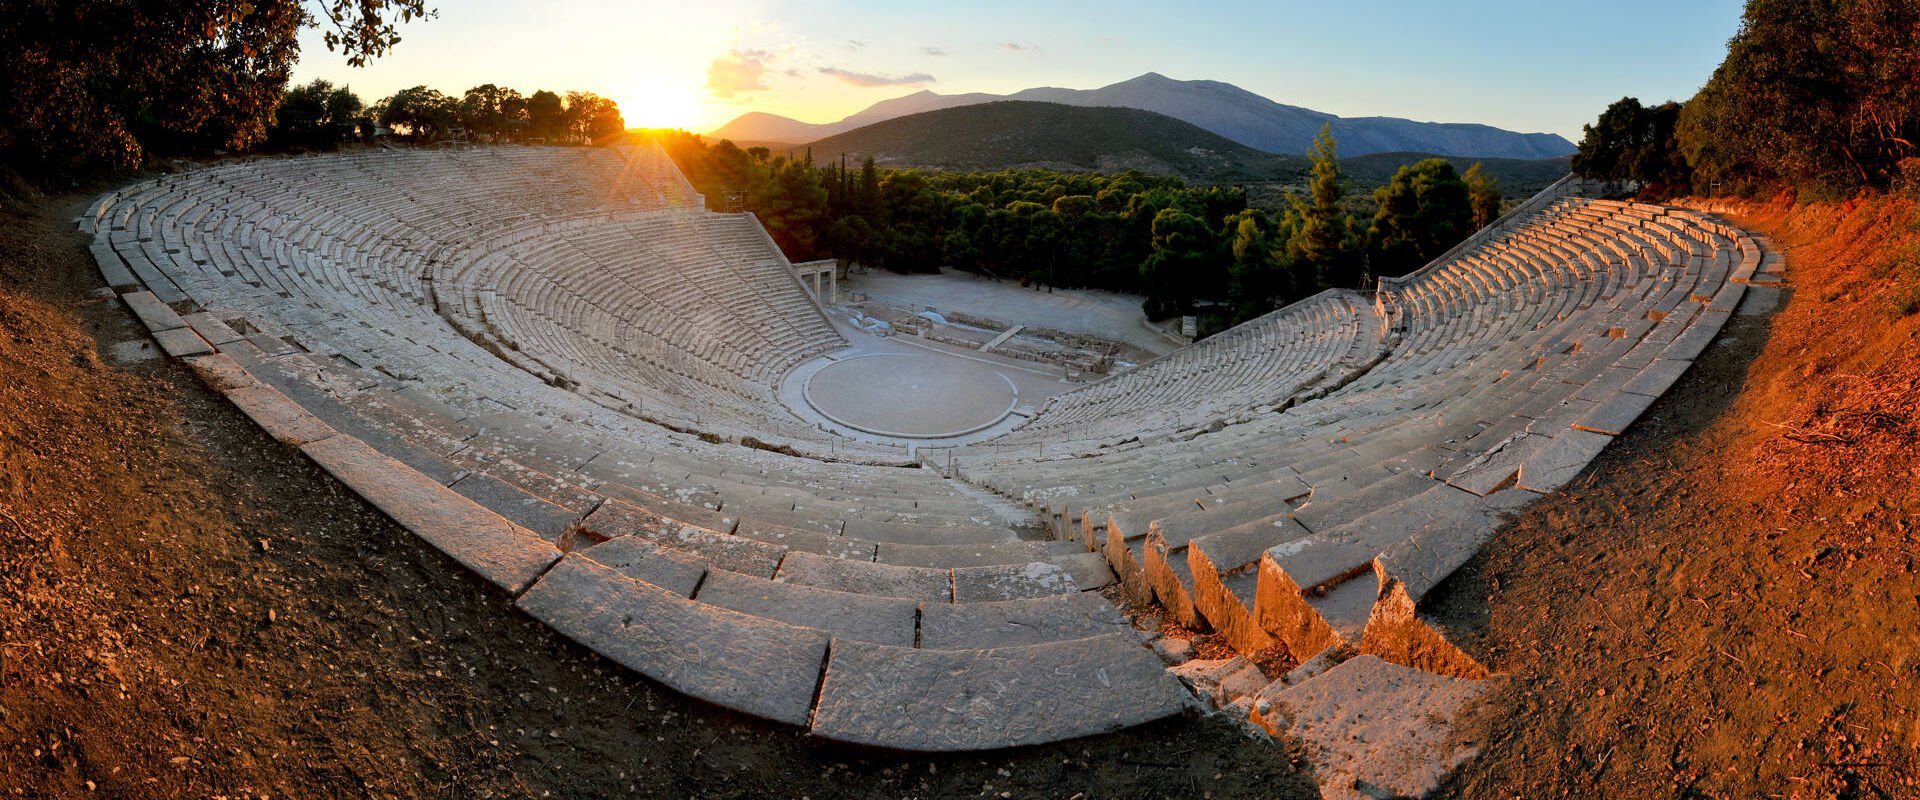 Epidaurus, the oldest theater in ancient Greece